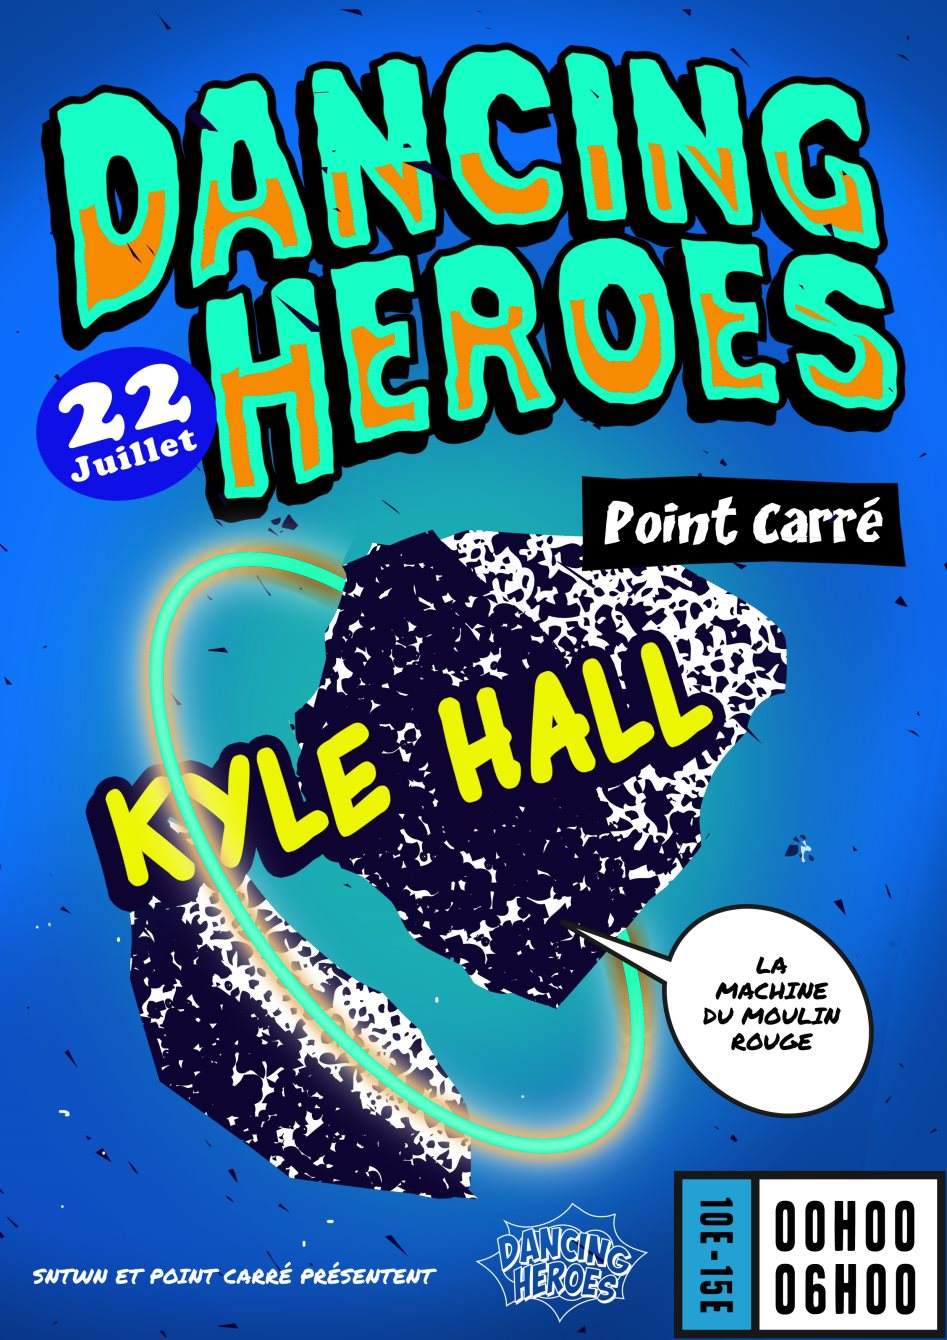 Dancing Heroes with Kyle Hall & Point Carré - Página frontal